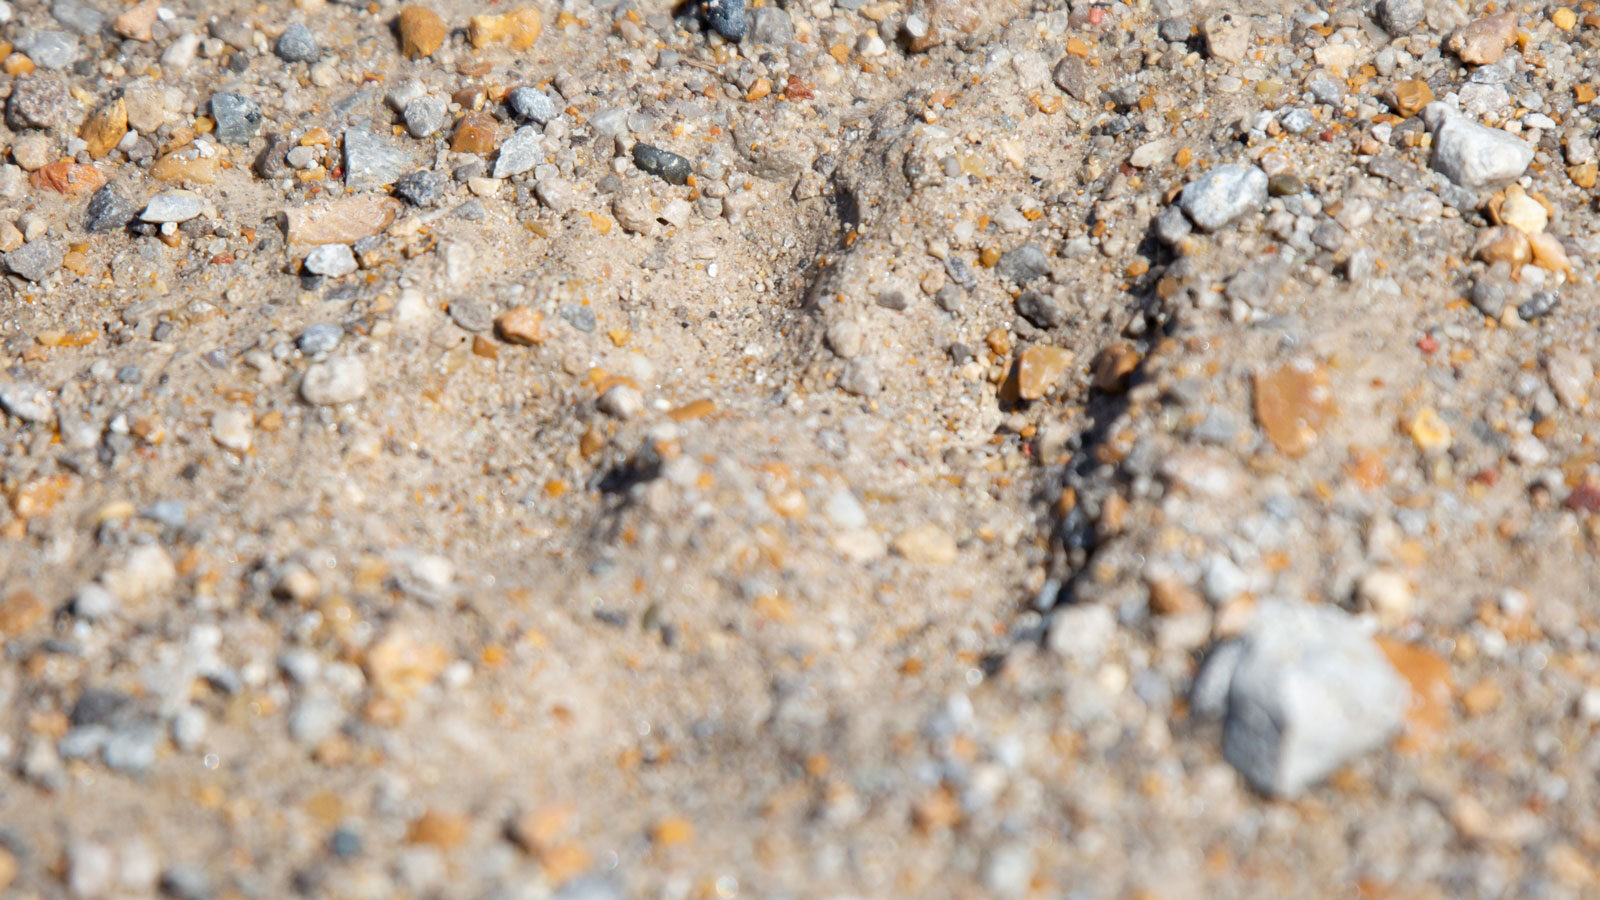 Coyote track in dirt